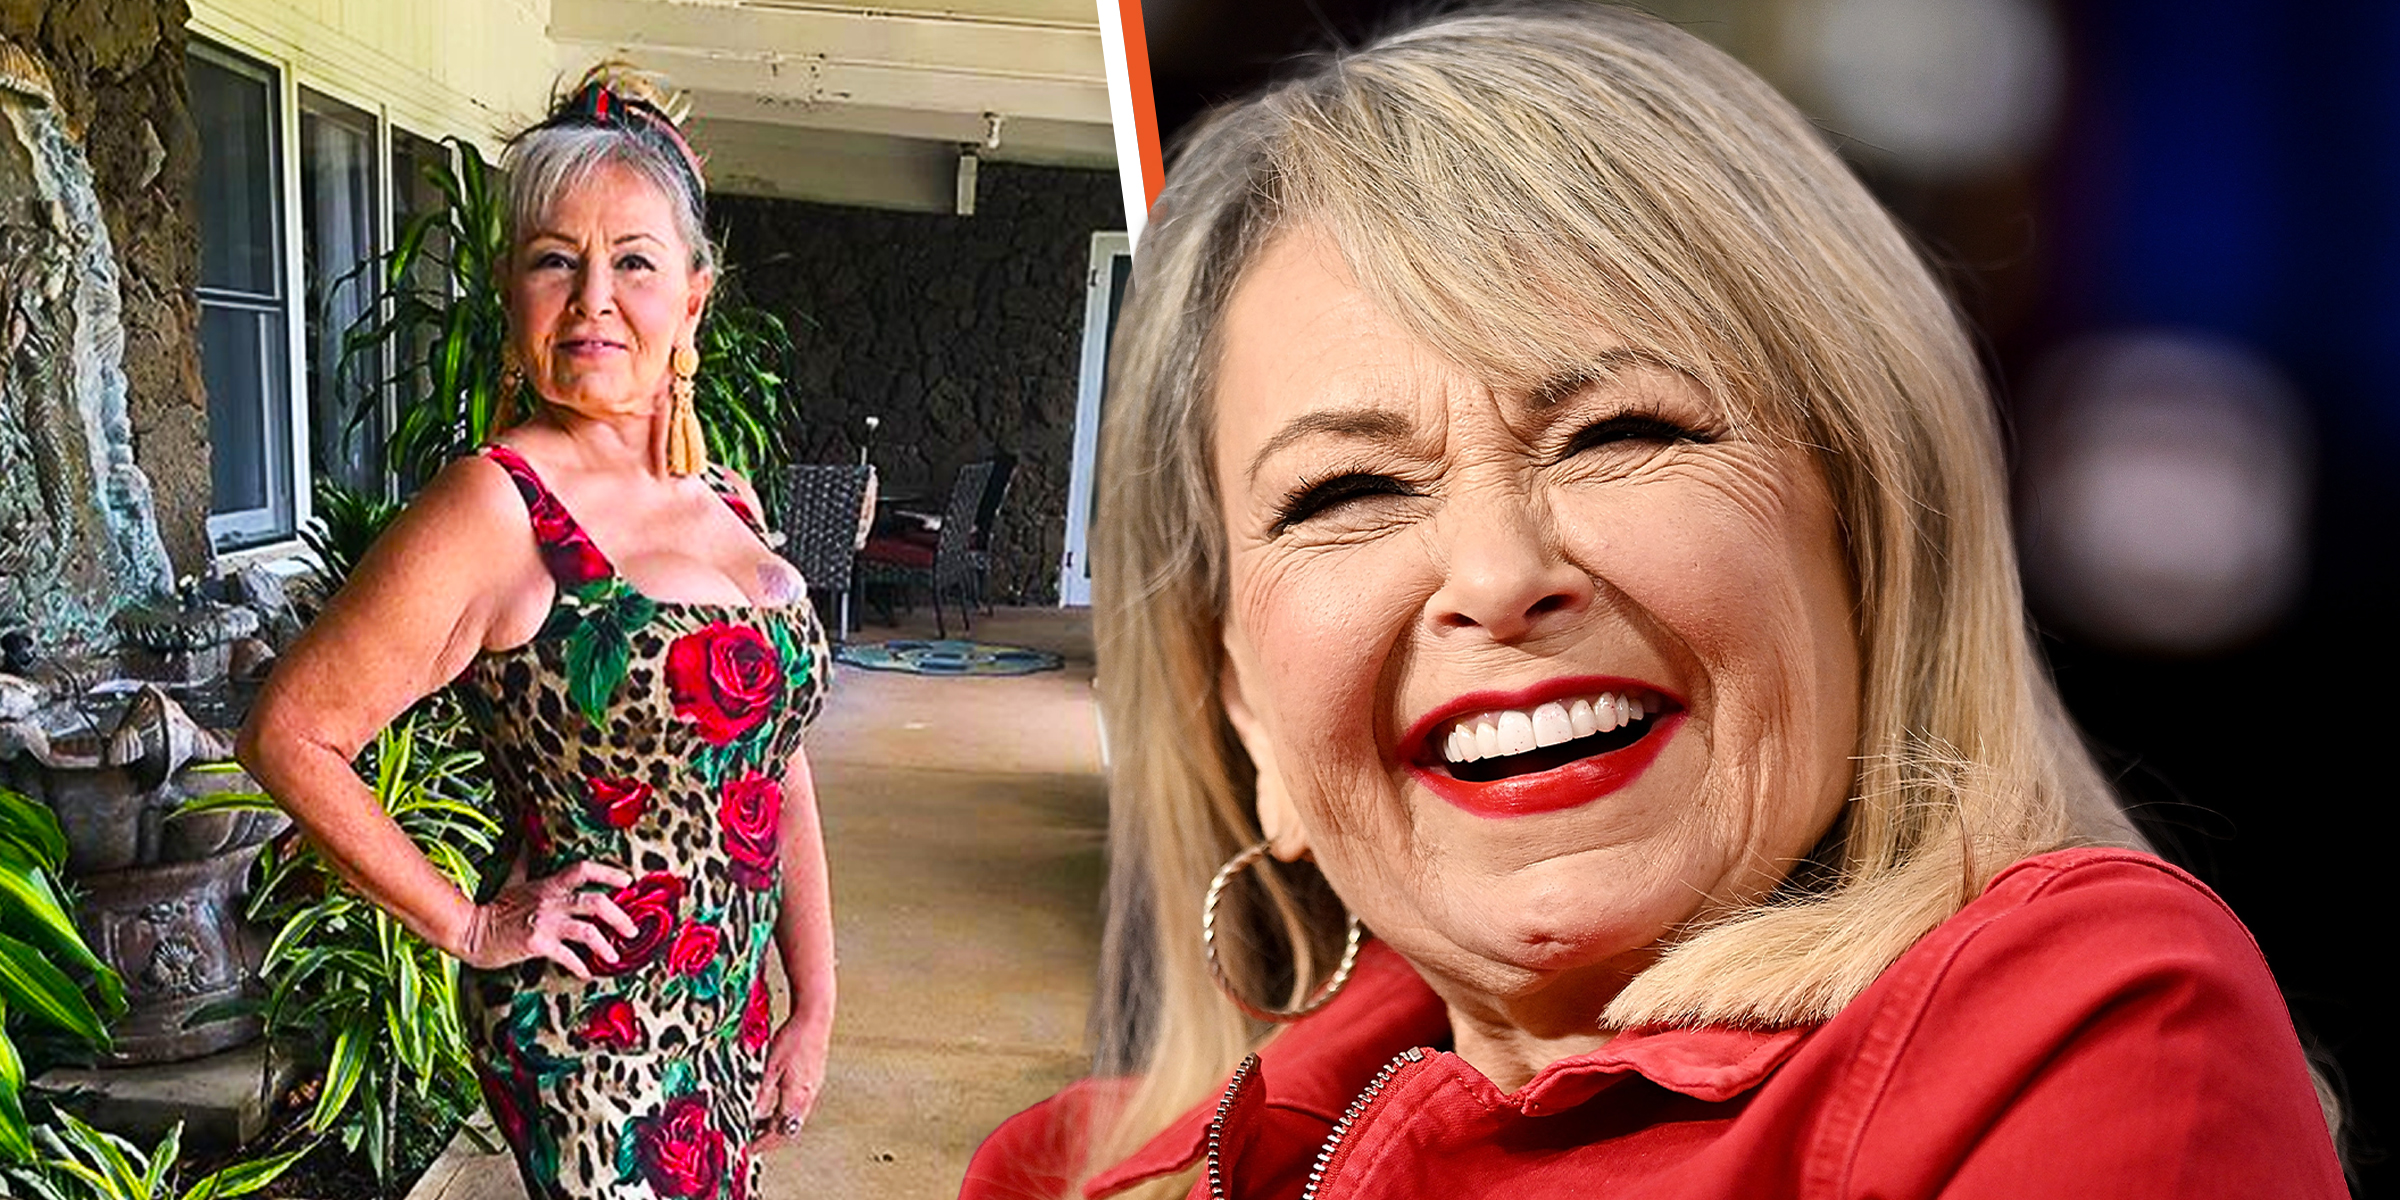 Roseanne Barr | Source: Getty Images